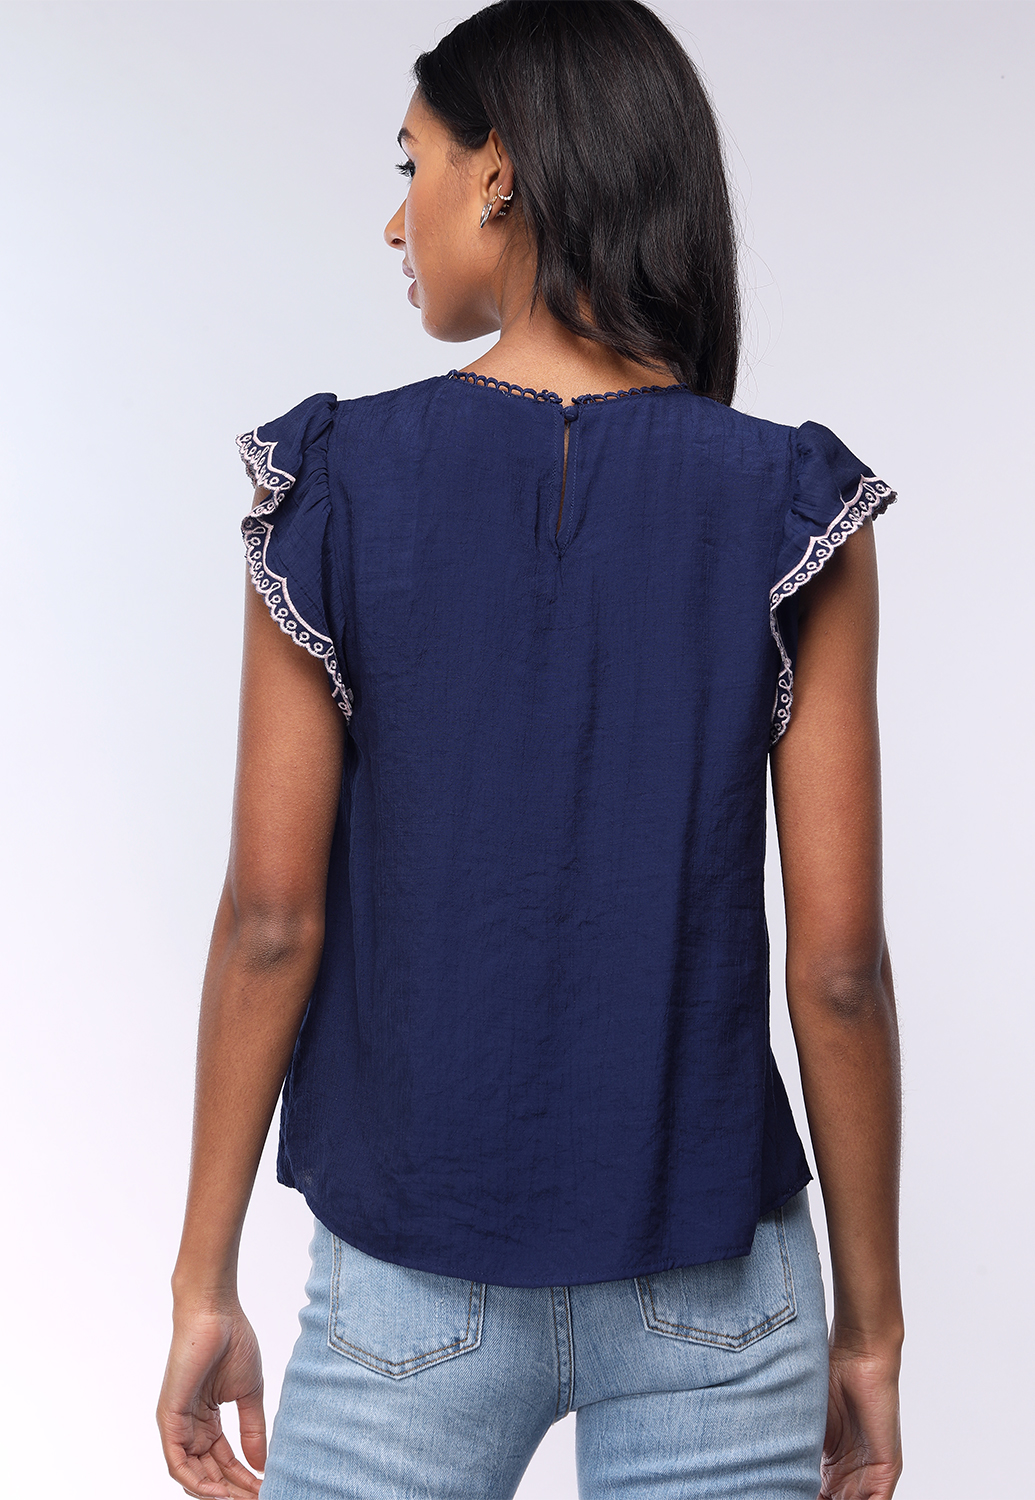 Embroidered Crochet Trim Top 